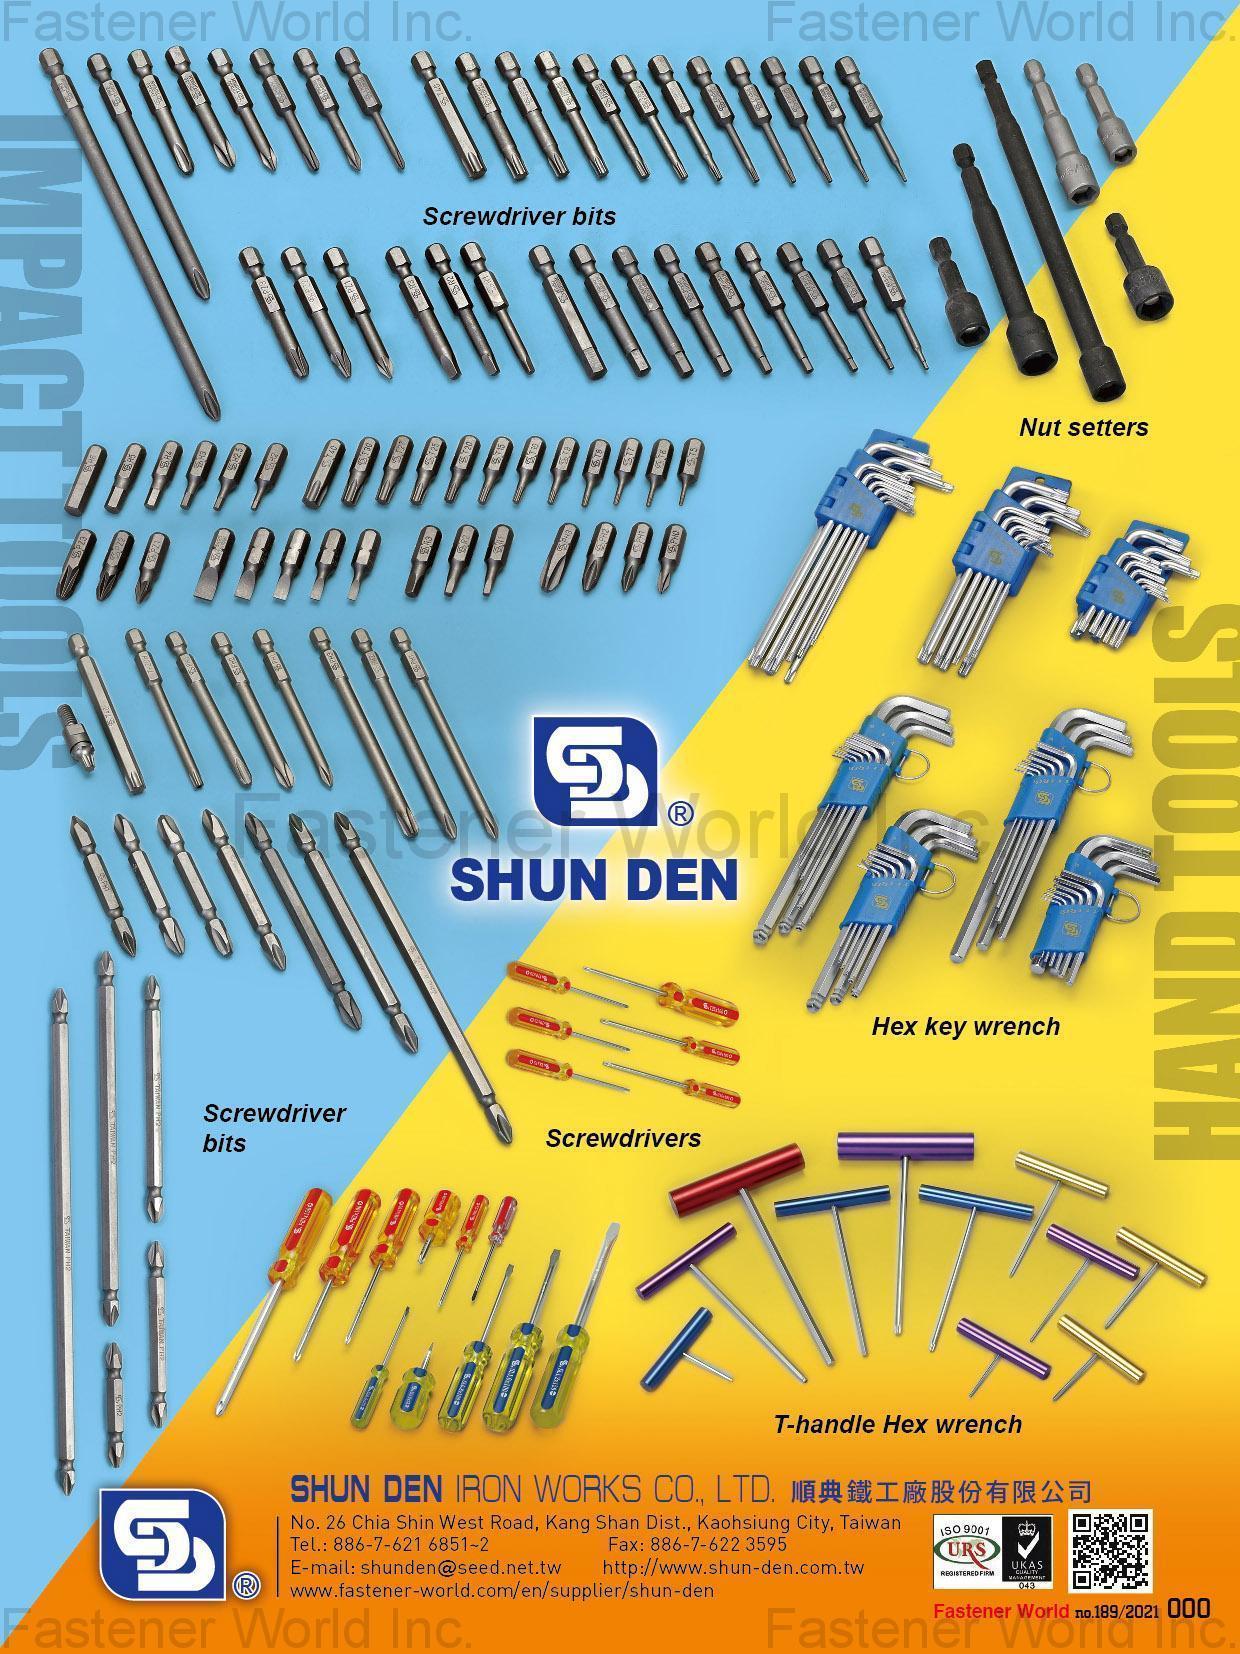  Screwdriver bits, Nut setters, Screwdrivers, Hex Key Wrench, T-handle Hex Wrench